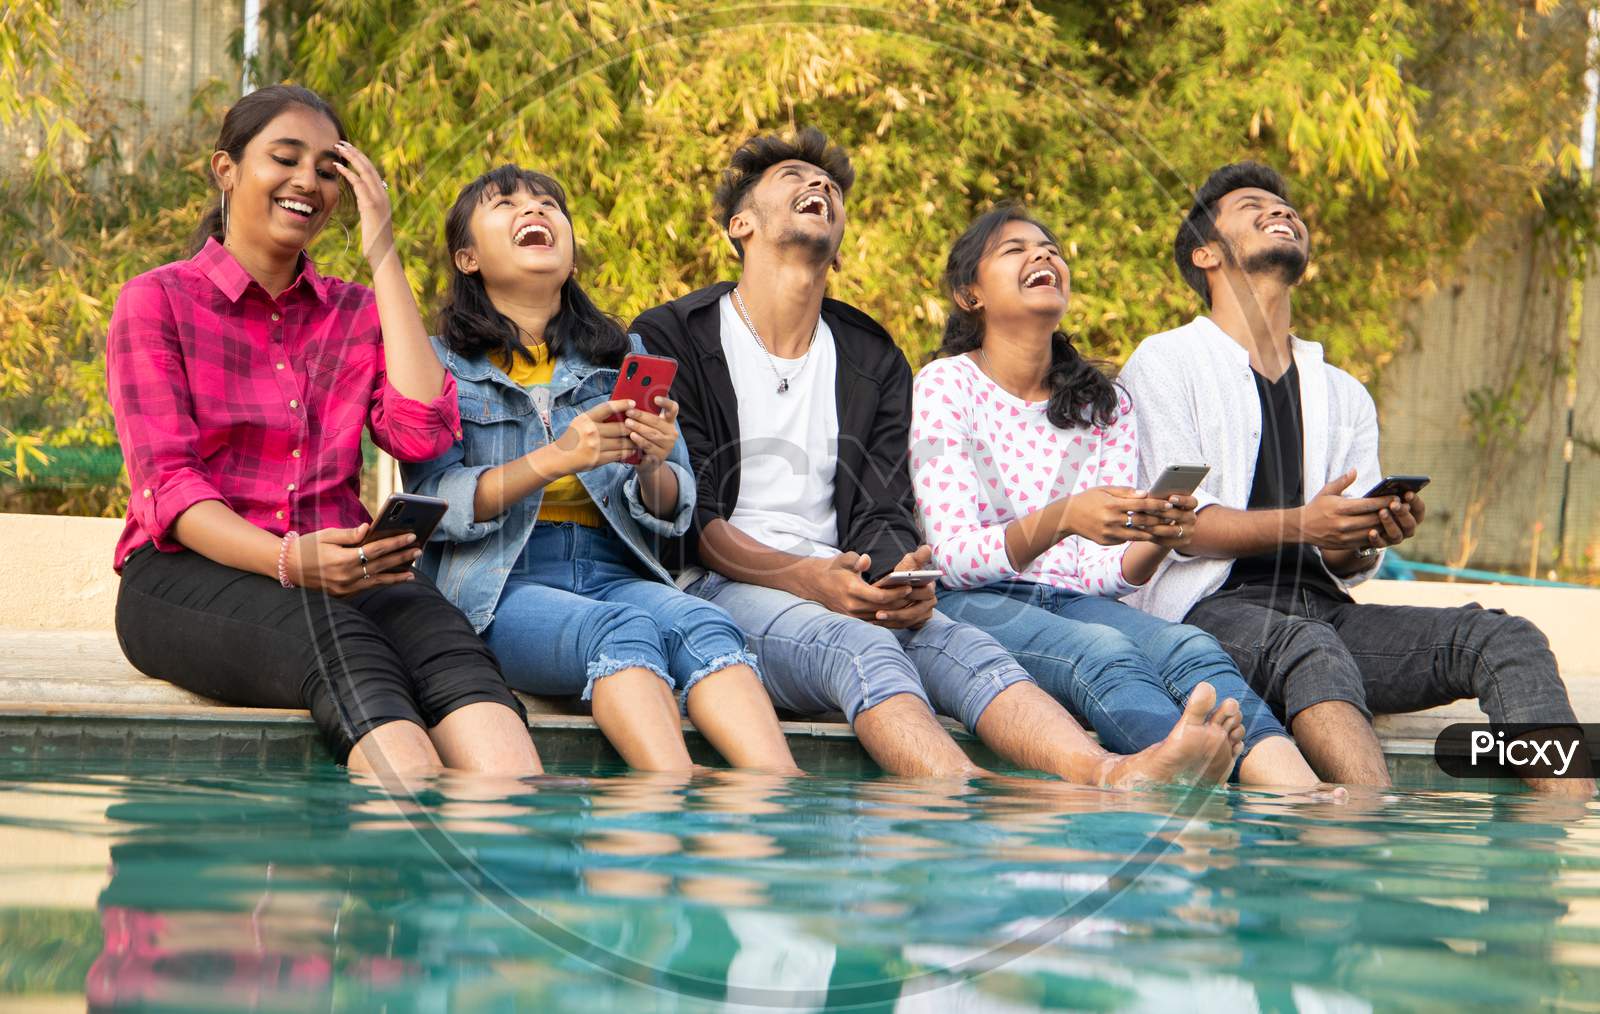 Group Of Happy Young Boys and Girls By Looking At Mobile Phone Laughing Loudly - Millennials Enjoying Online Video Content Or Social Media By Watching Smart Phone.